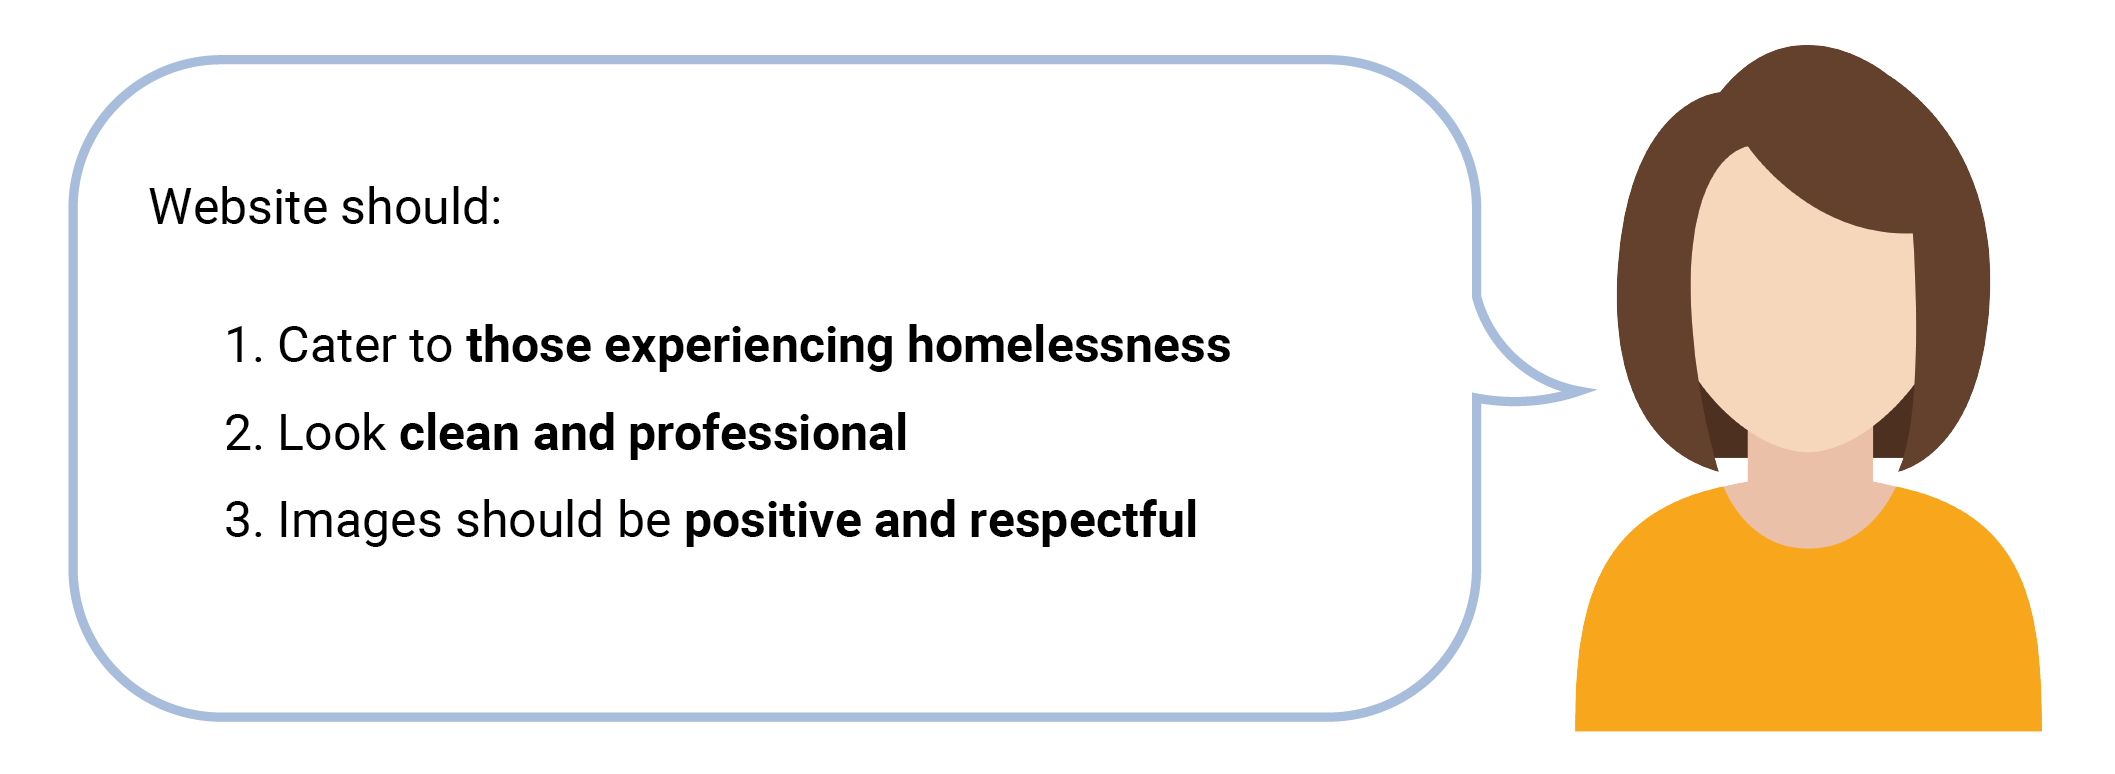 Stakeholder Insights. The websites should: cater to those experiencing homelessness, look clean and professional, and images should be positive and respectful.